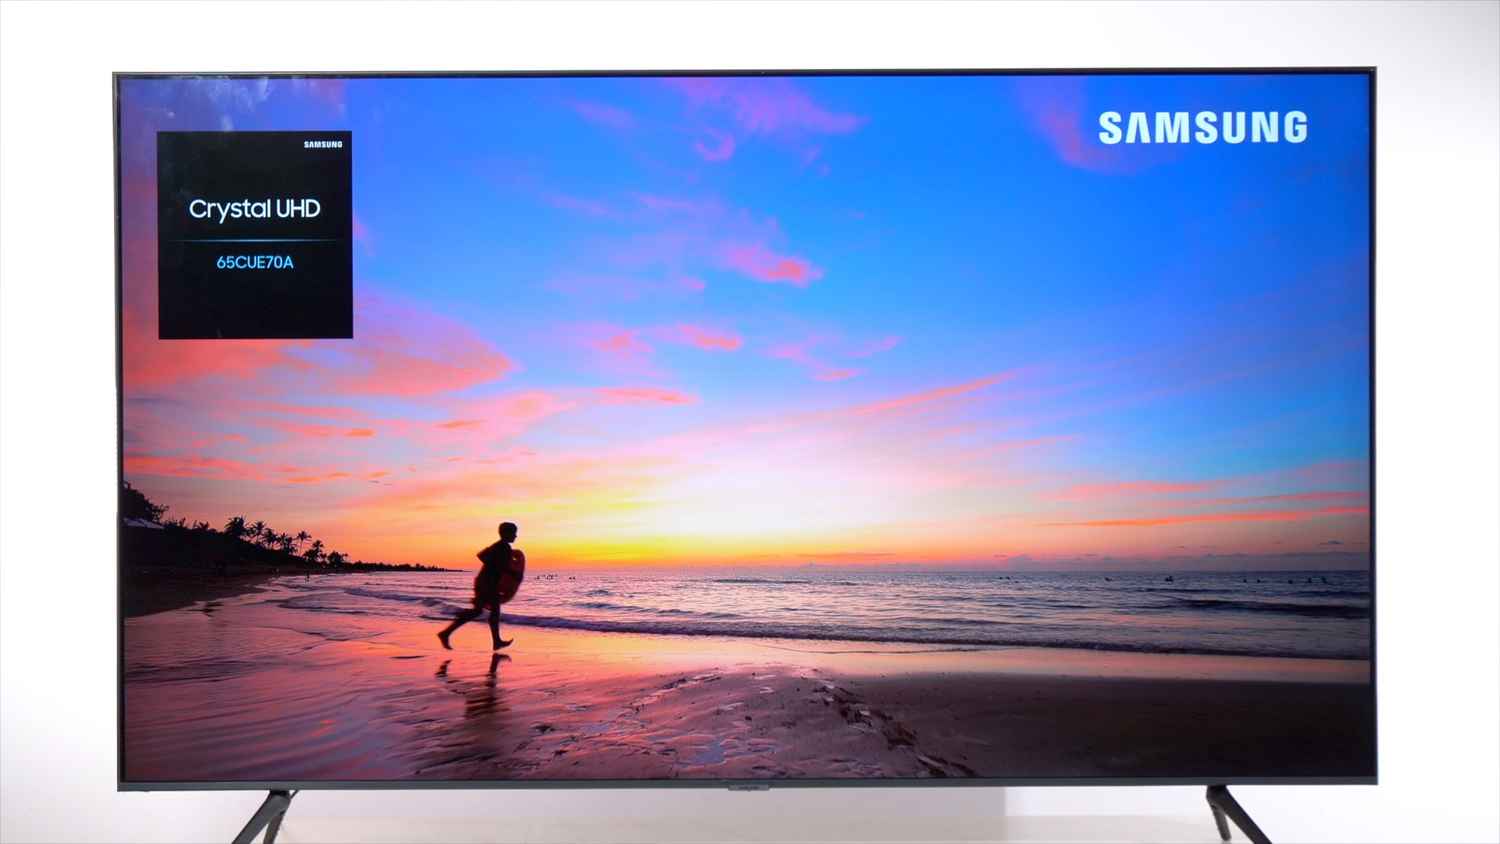 Samsung Crystal Vision 4K TV CUE70 FAQ – Everything you need to know!